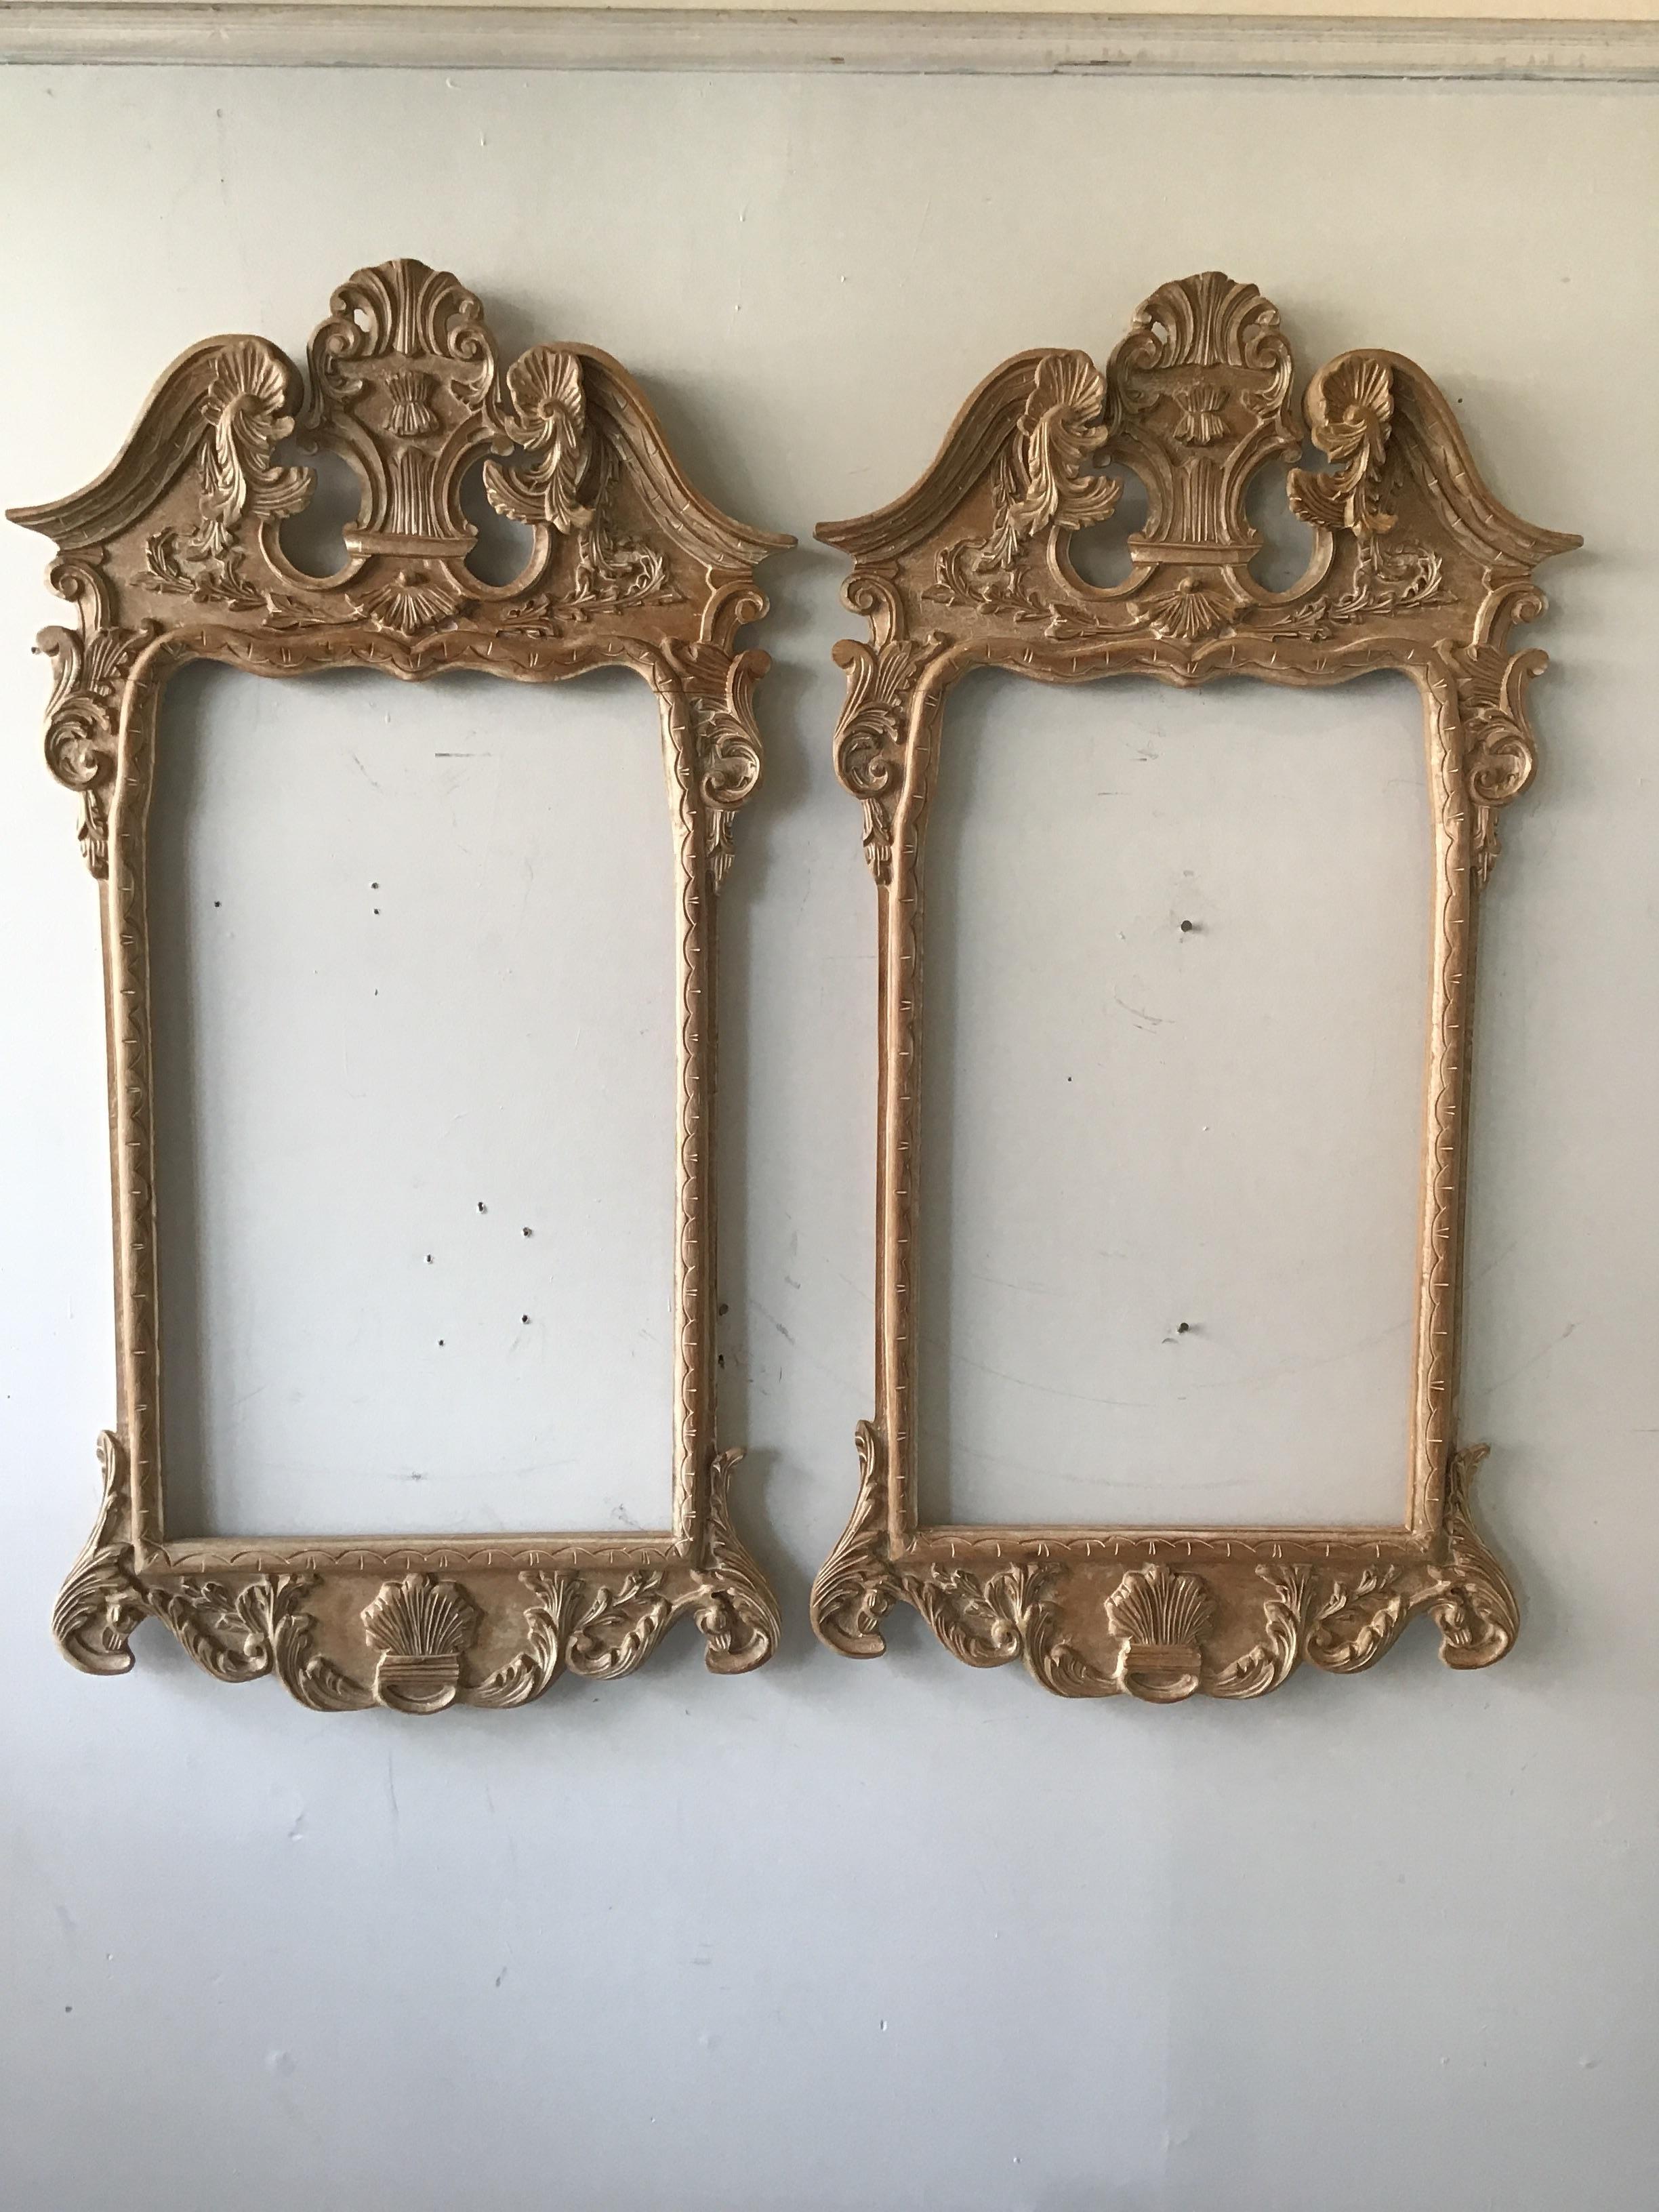 Pair of hand carved wood frames from Italy. Made in the 1970s, but never taken out of the original wrapping until now.